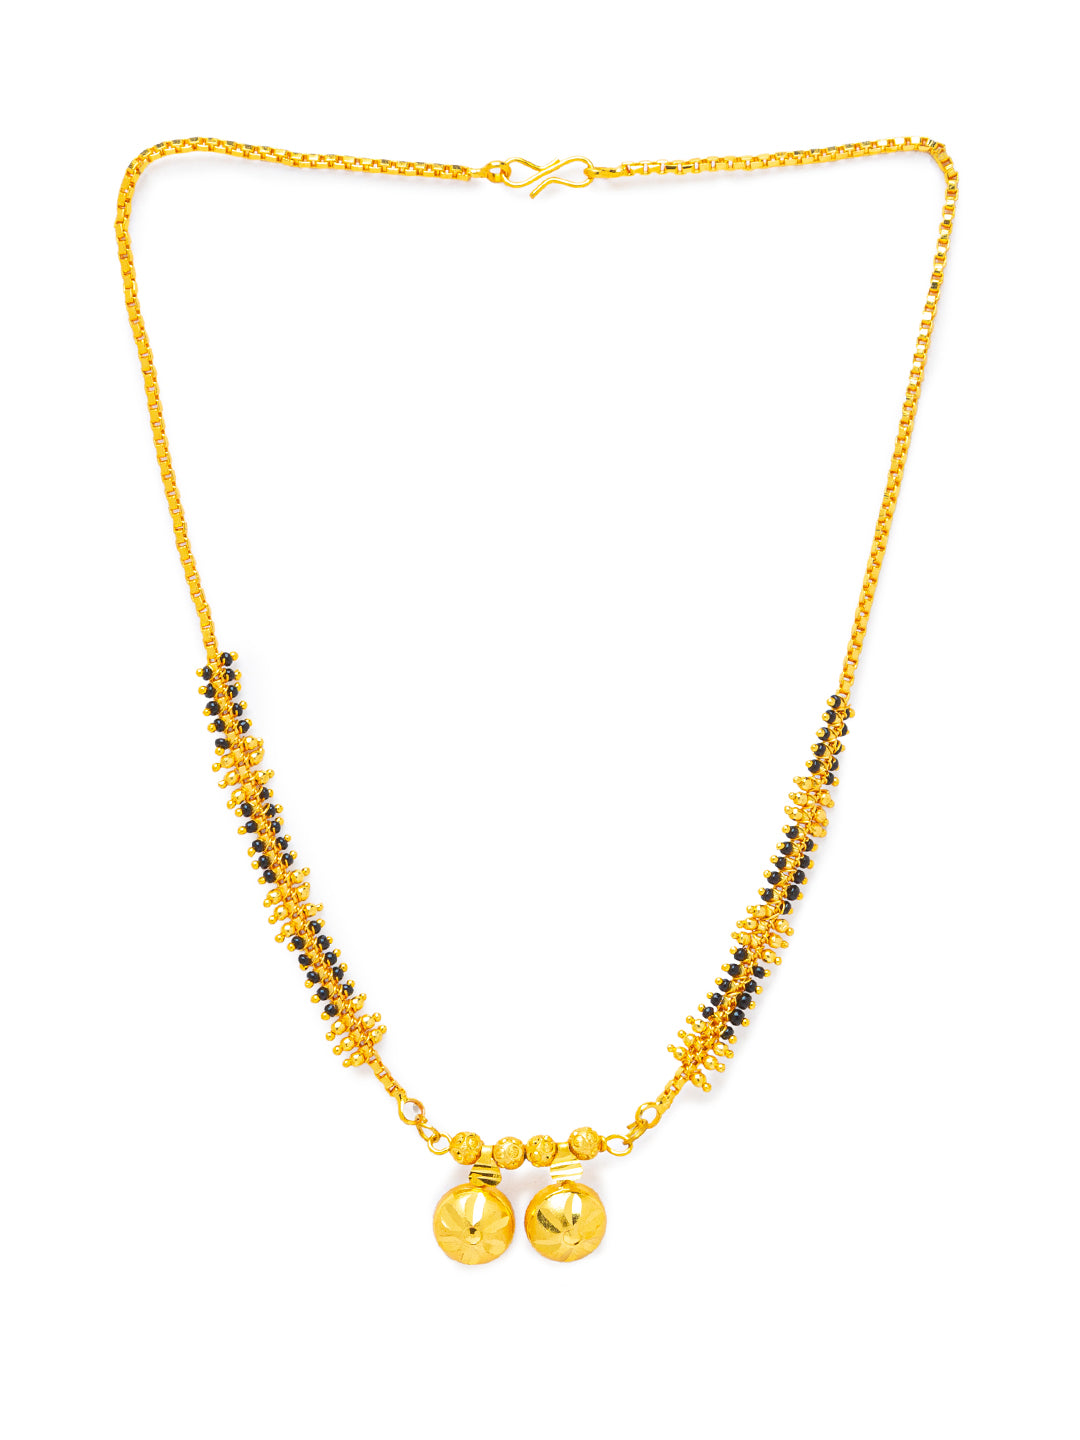 Combo Set of 2 Gold Plated Short Mangalsutra Designs and Long Mangalsutra Designs with Vati Pendant